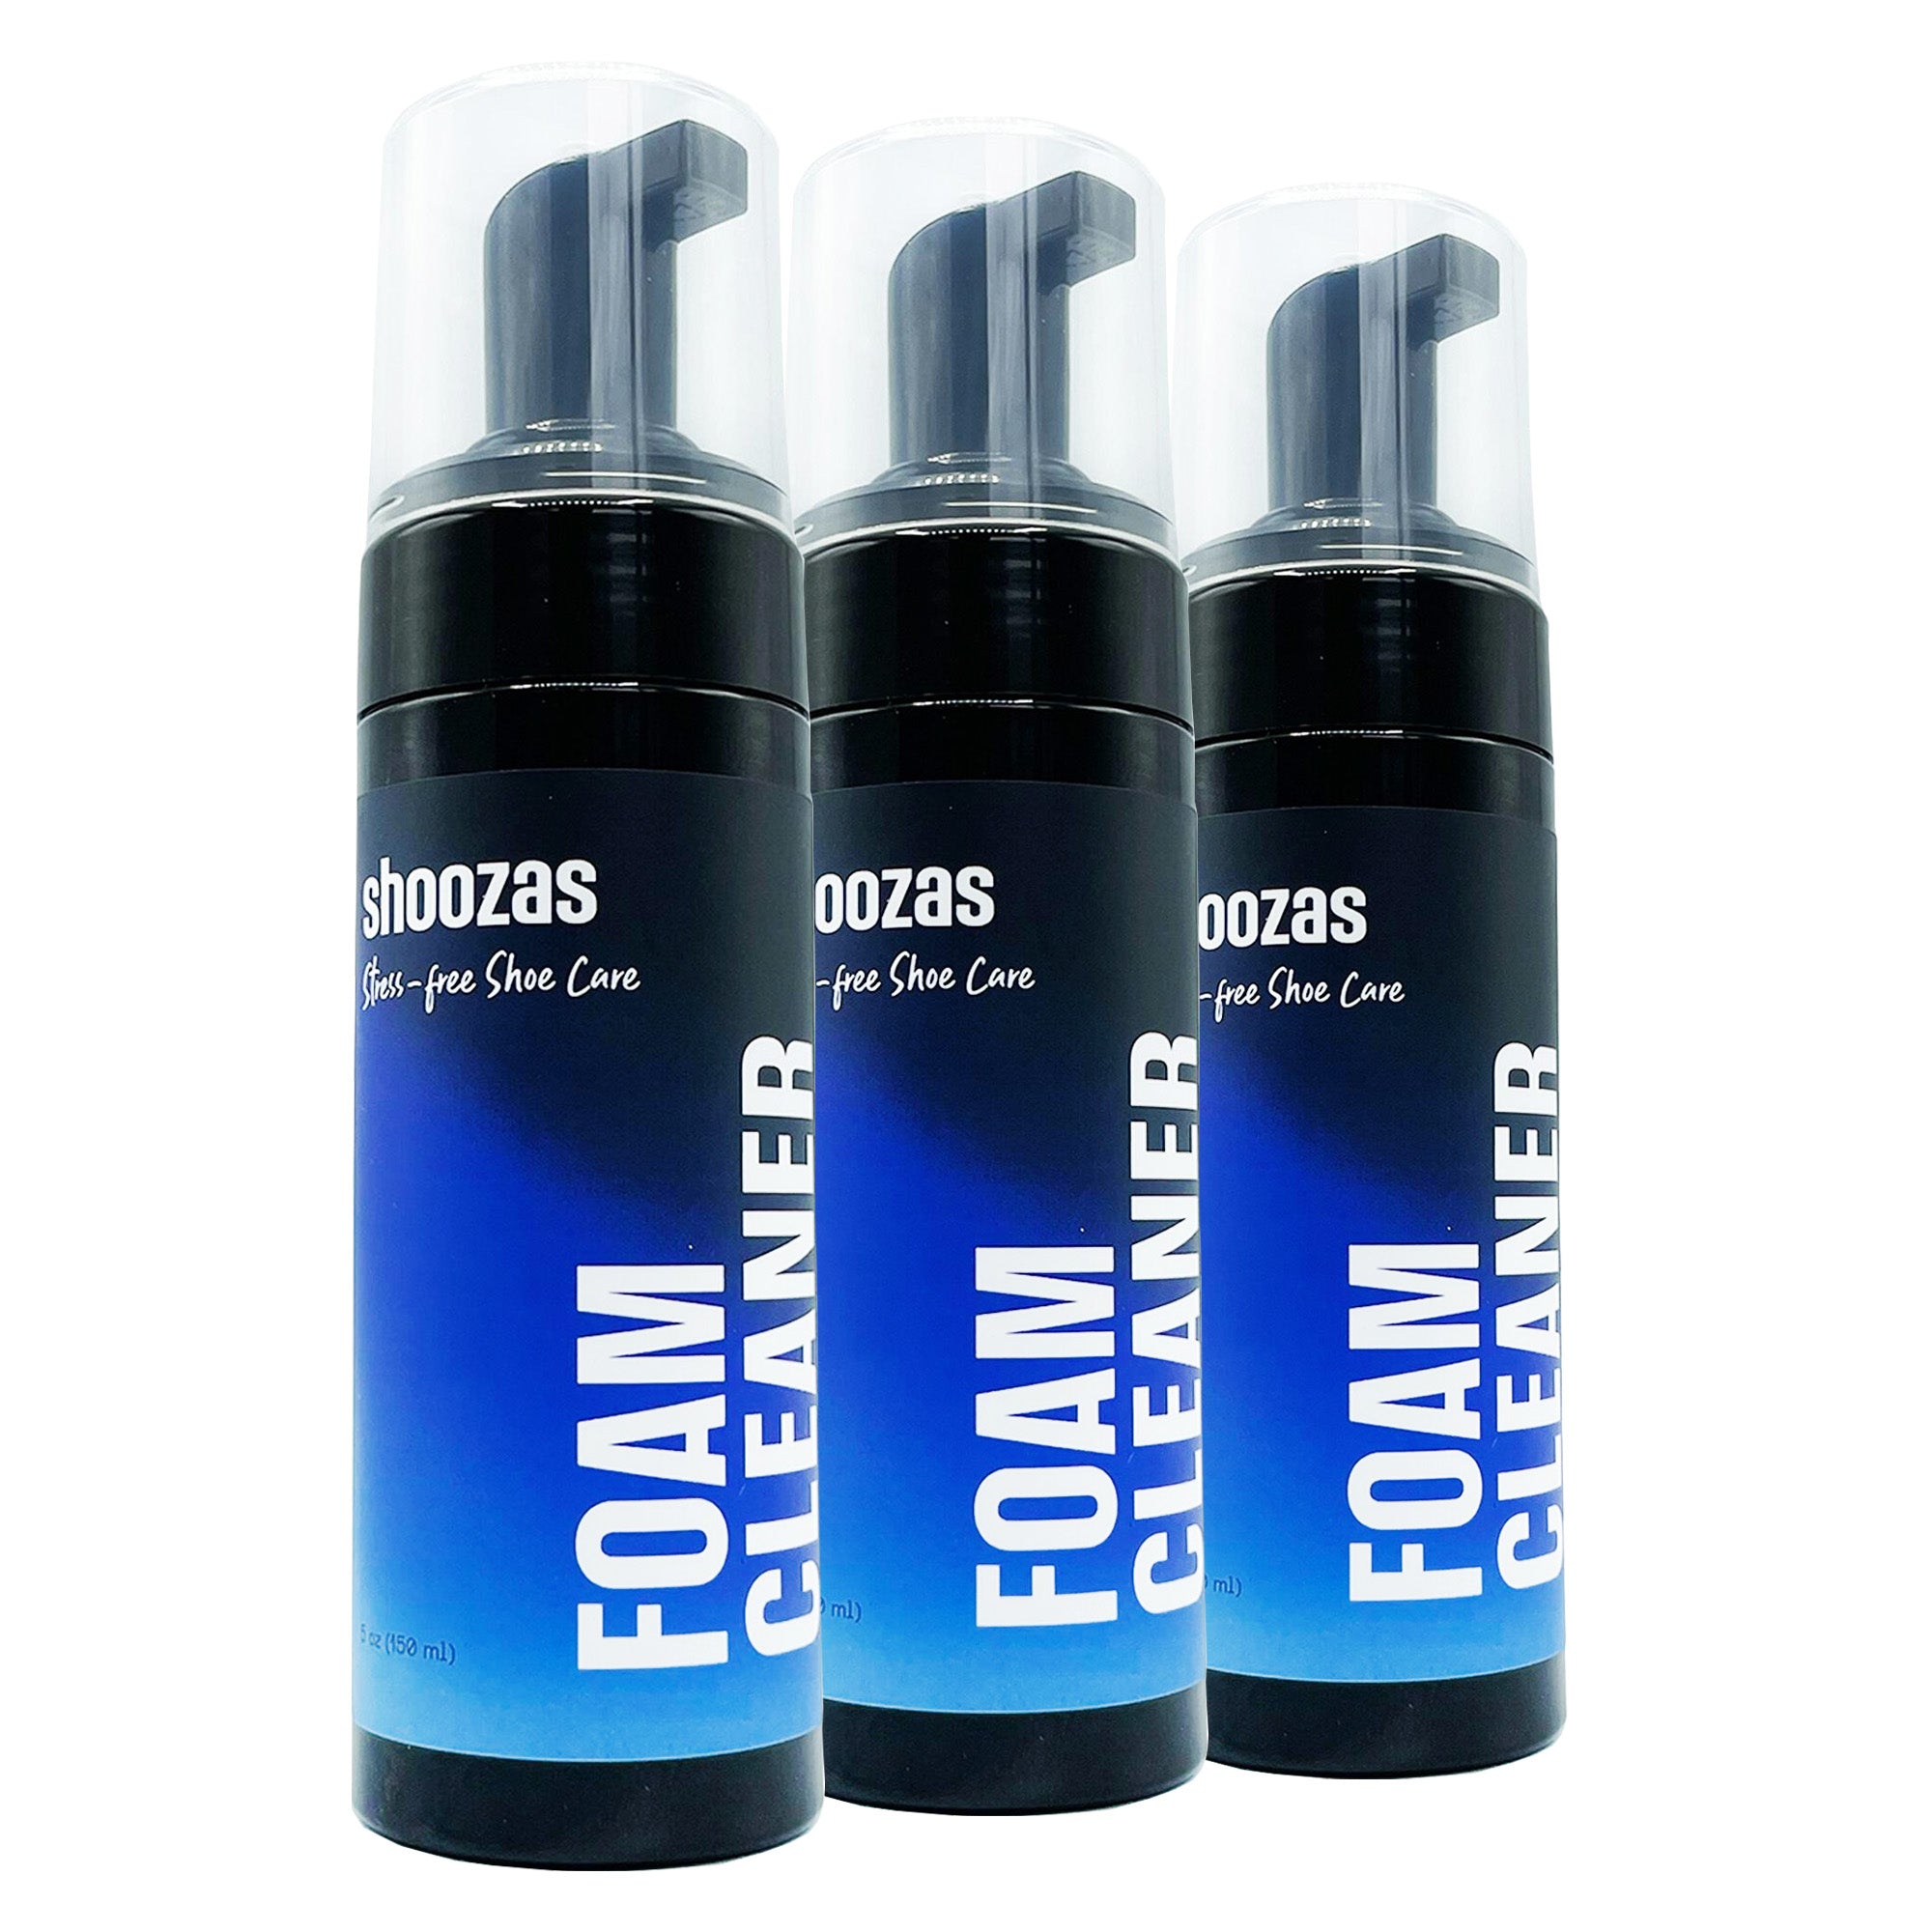 Buy An Wholesale shoe cleaner foam For Shoe Polishing And